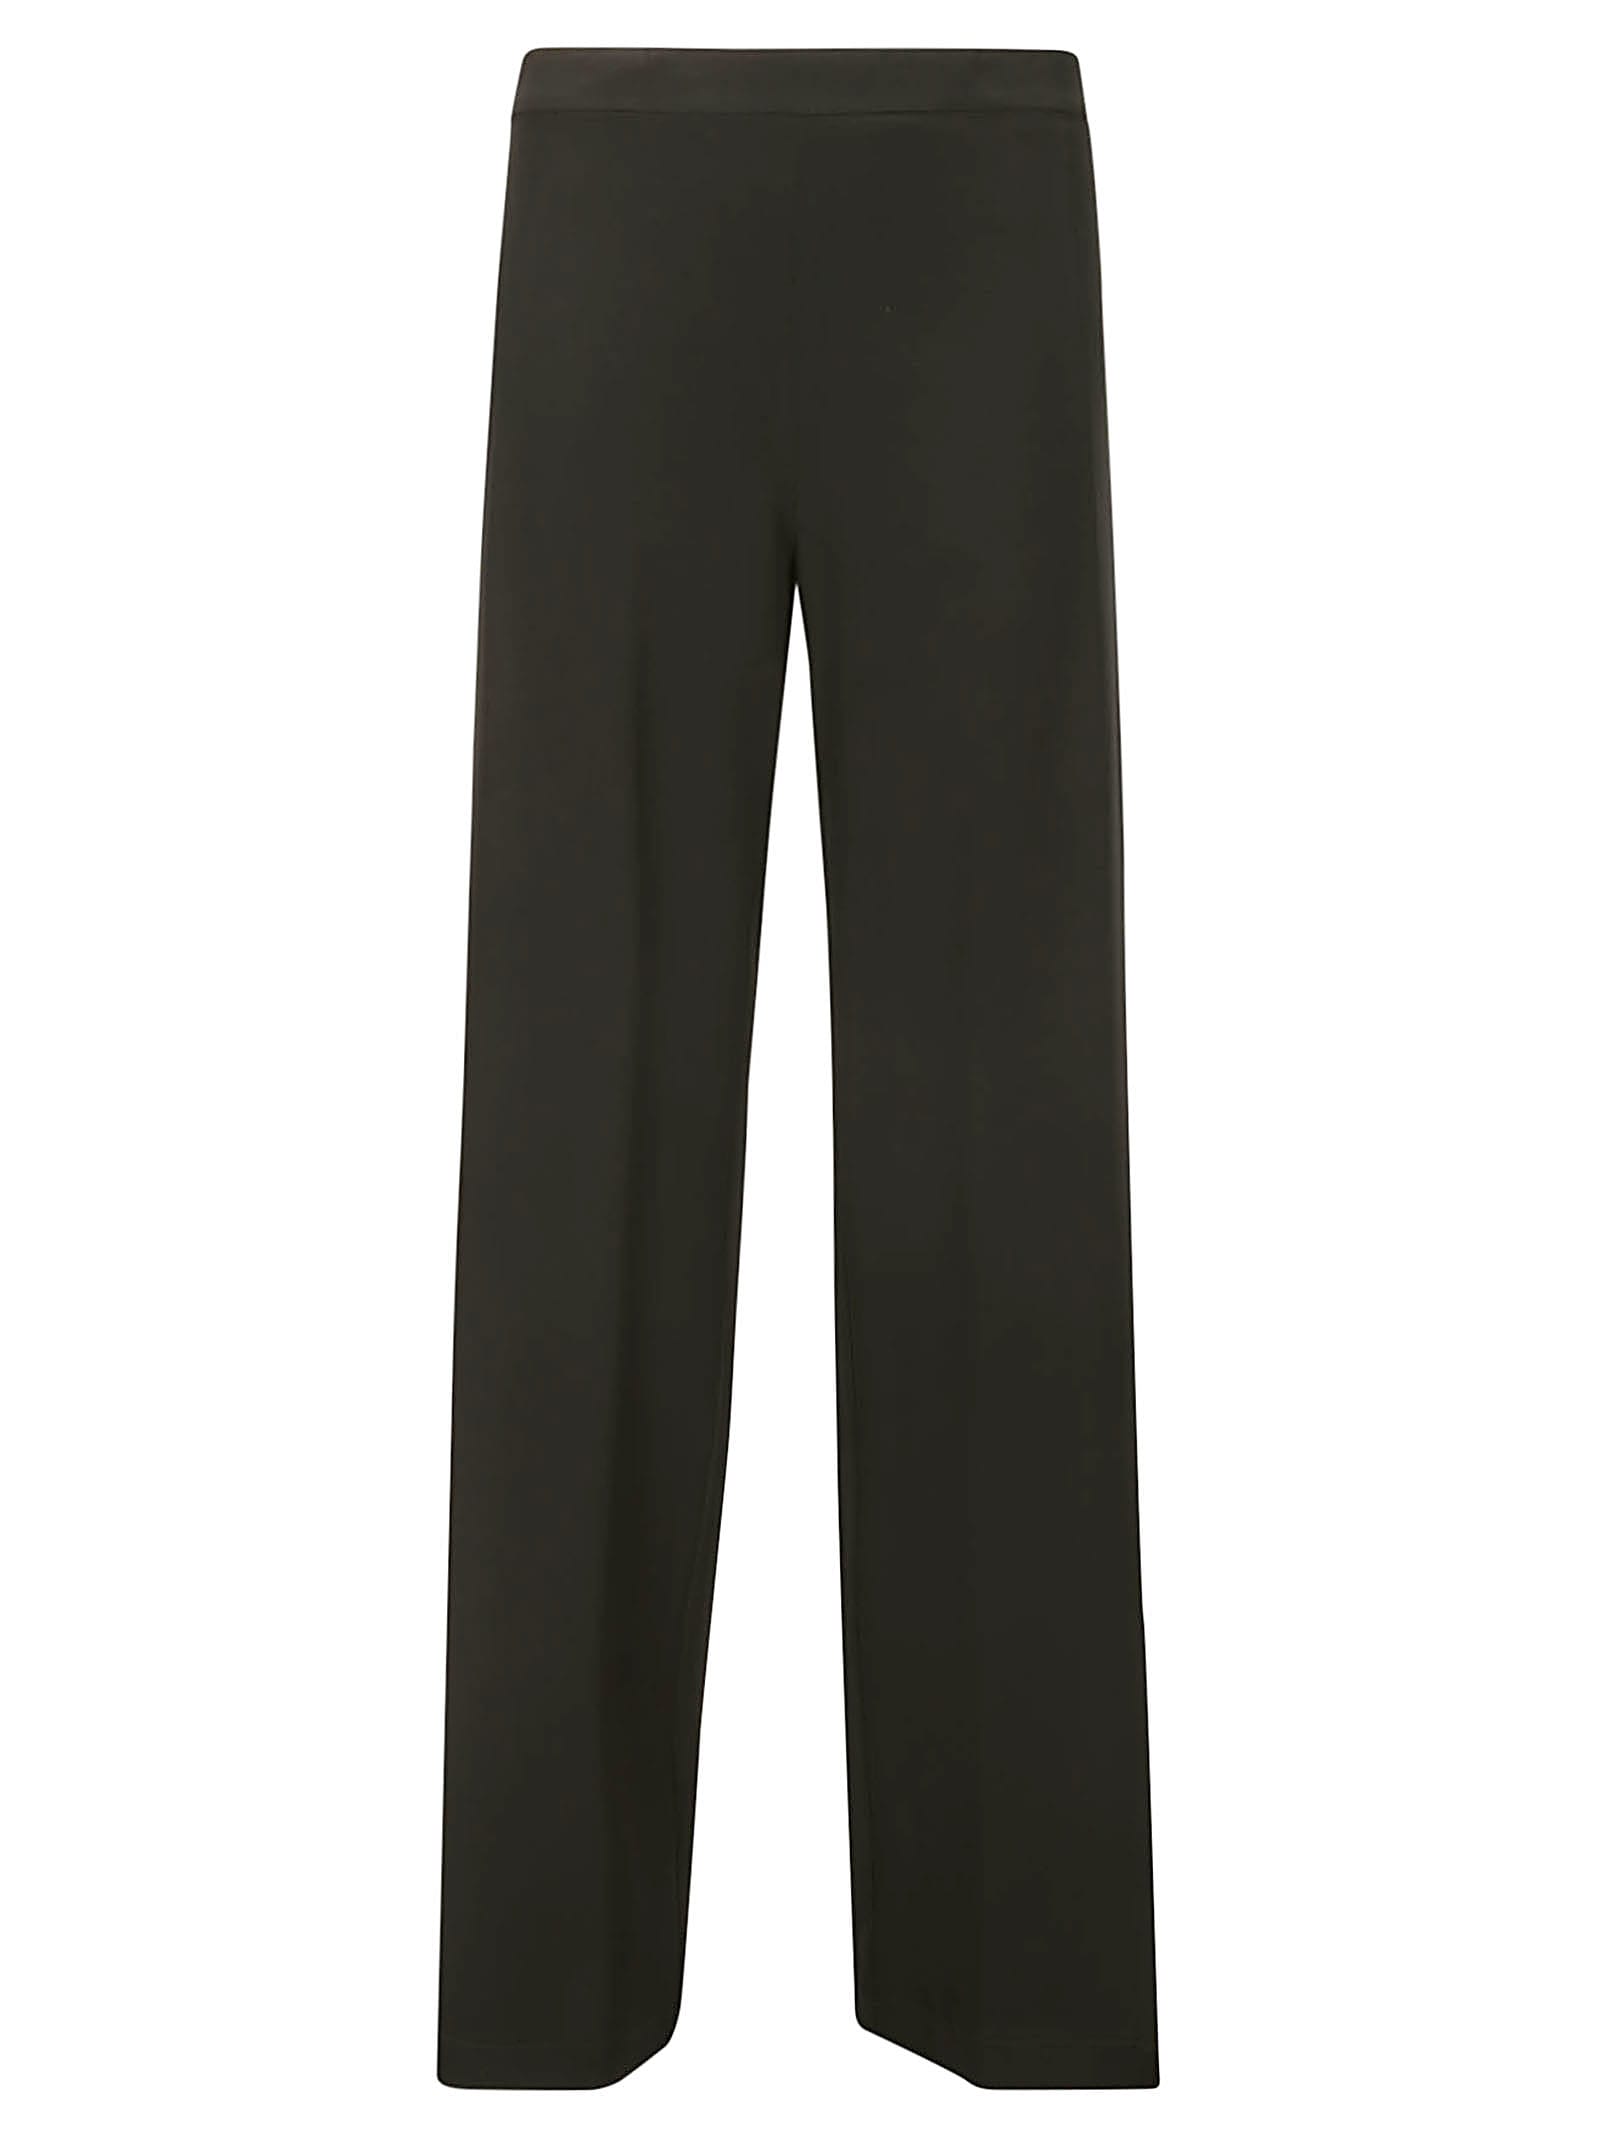 Crepe Trousers